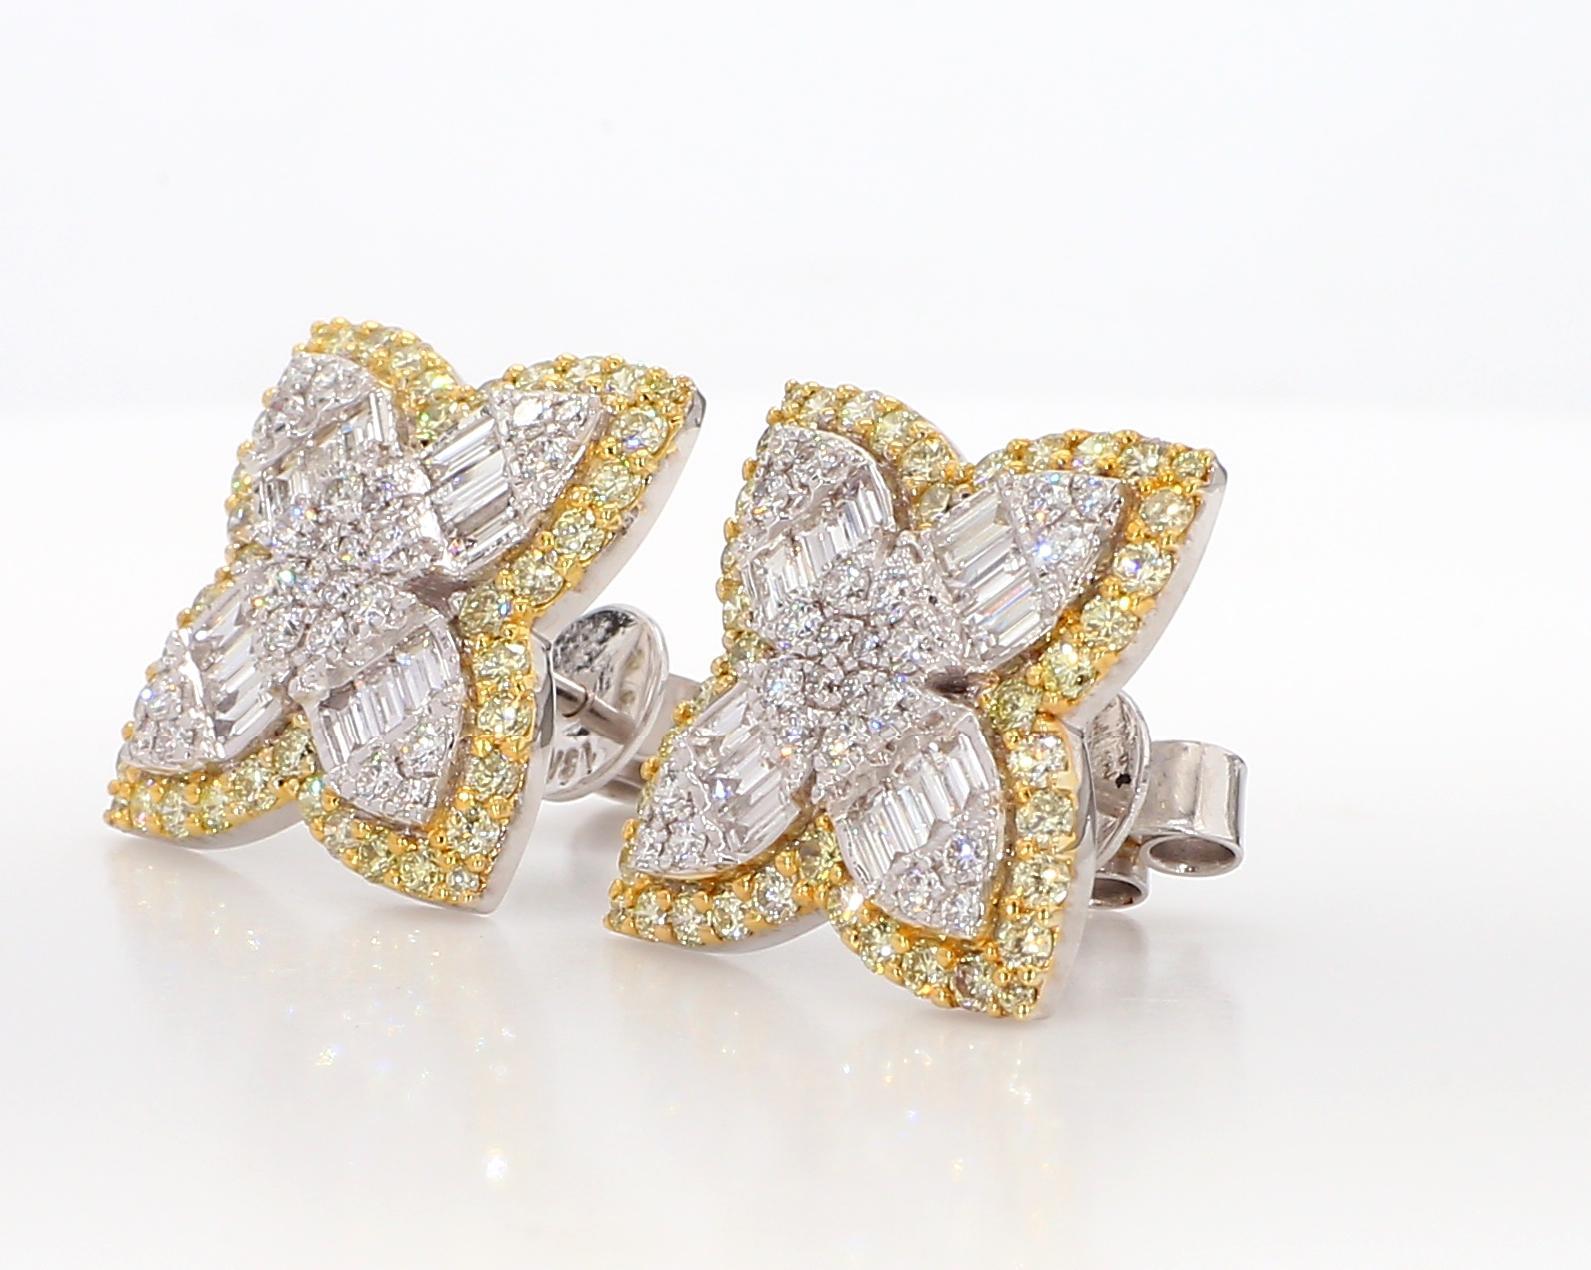 Contemporary Natural White Baguette Diamond 2.03 Carat TW Gold Stud Earrings For Sale